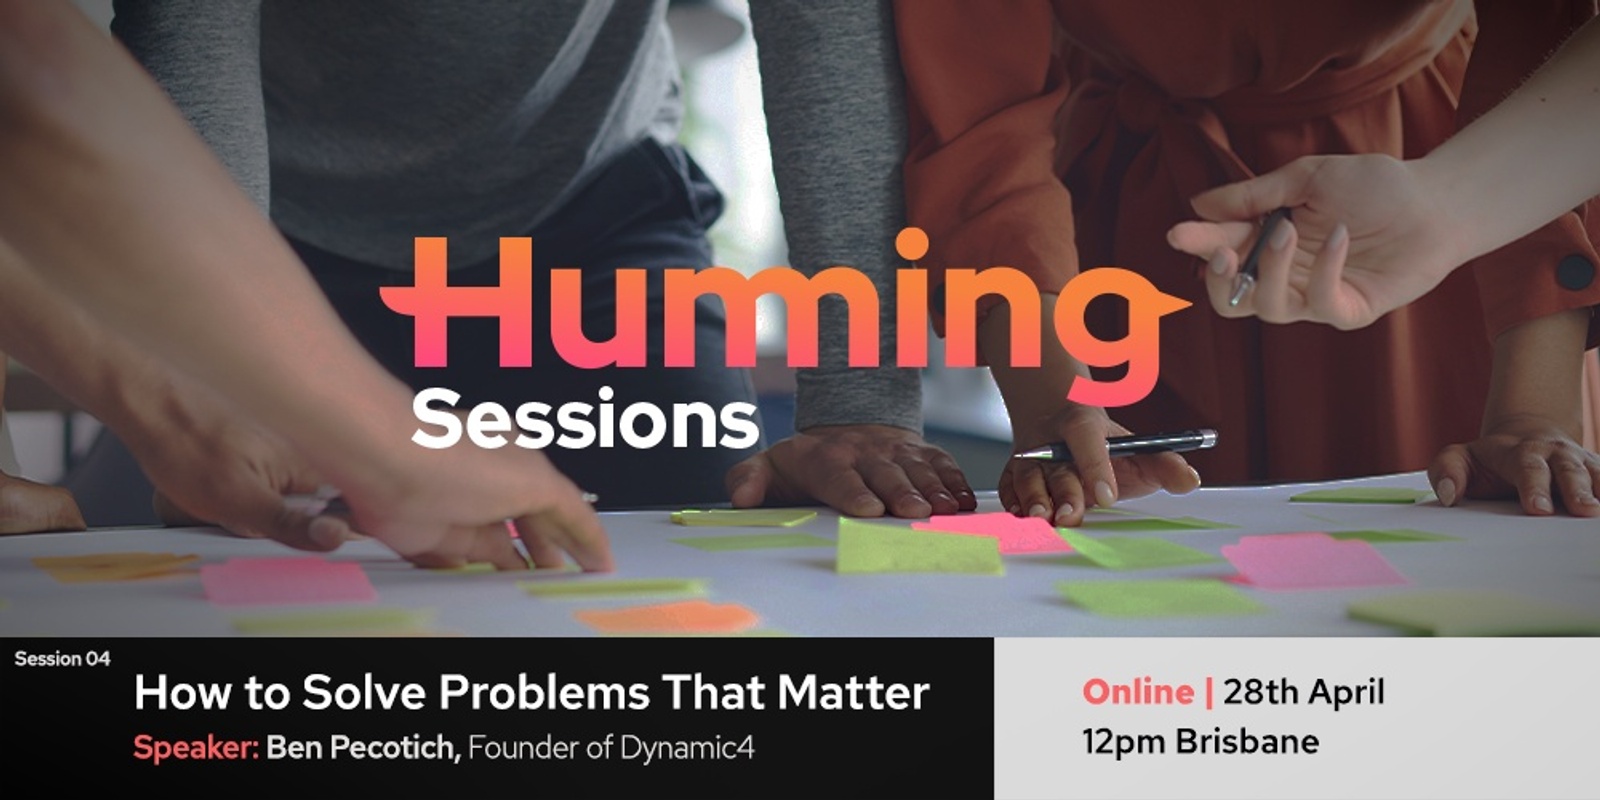 Humming Session 04: How to Solve Problems That Matter